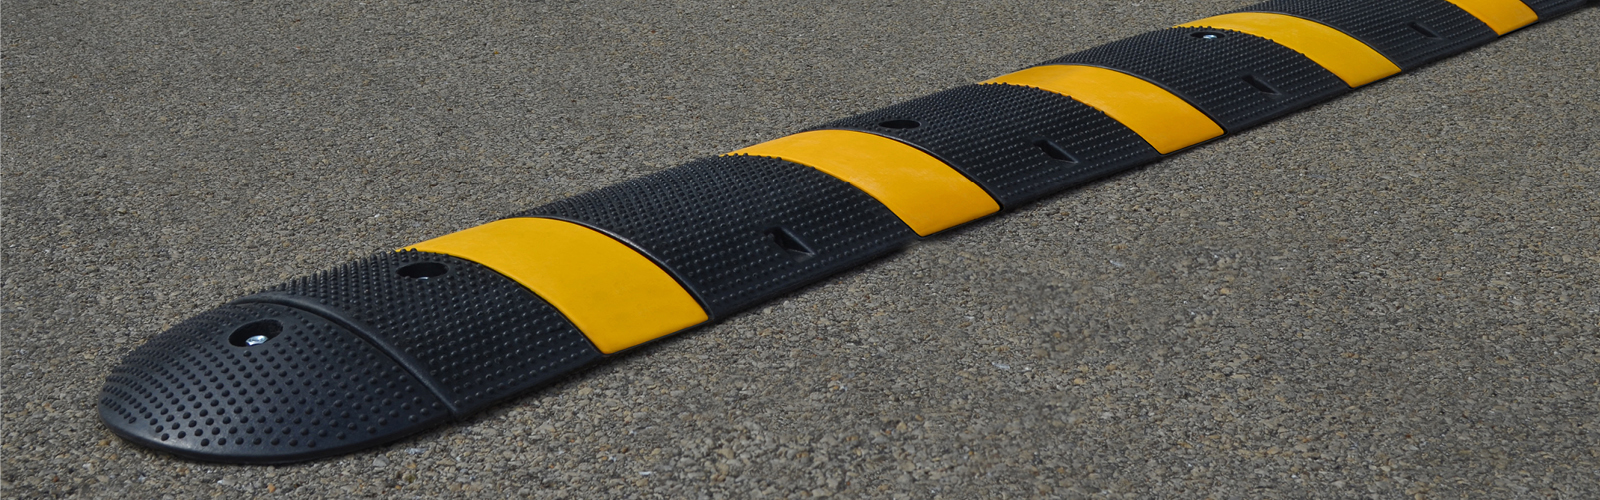 Understanding the Role and Functions of Parking Bumpers: A Comprehensive Guide by Commonwealth Paving